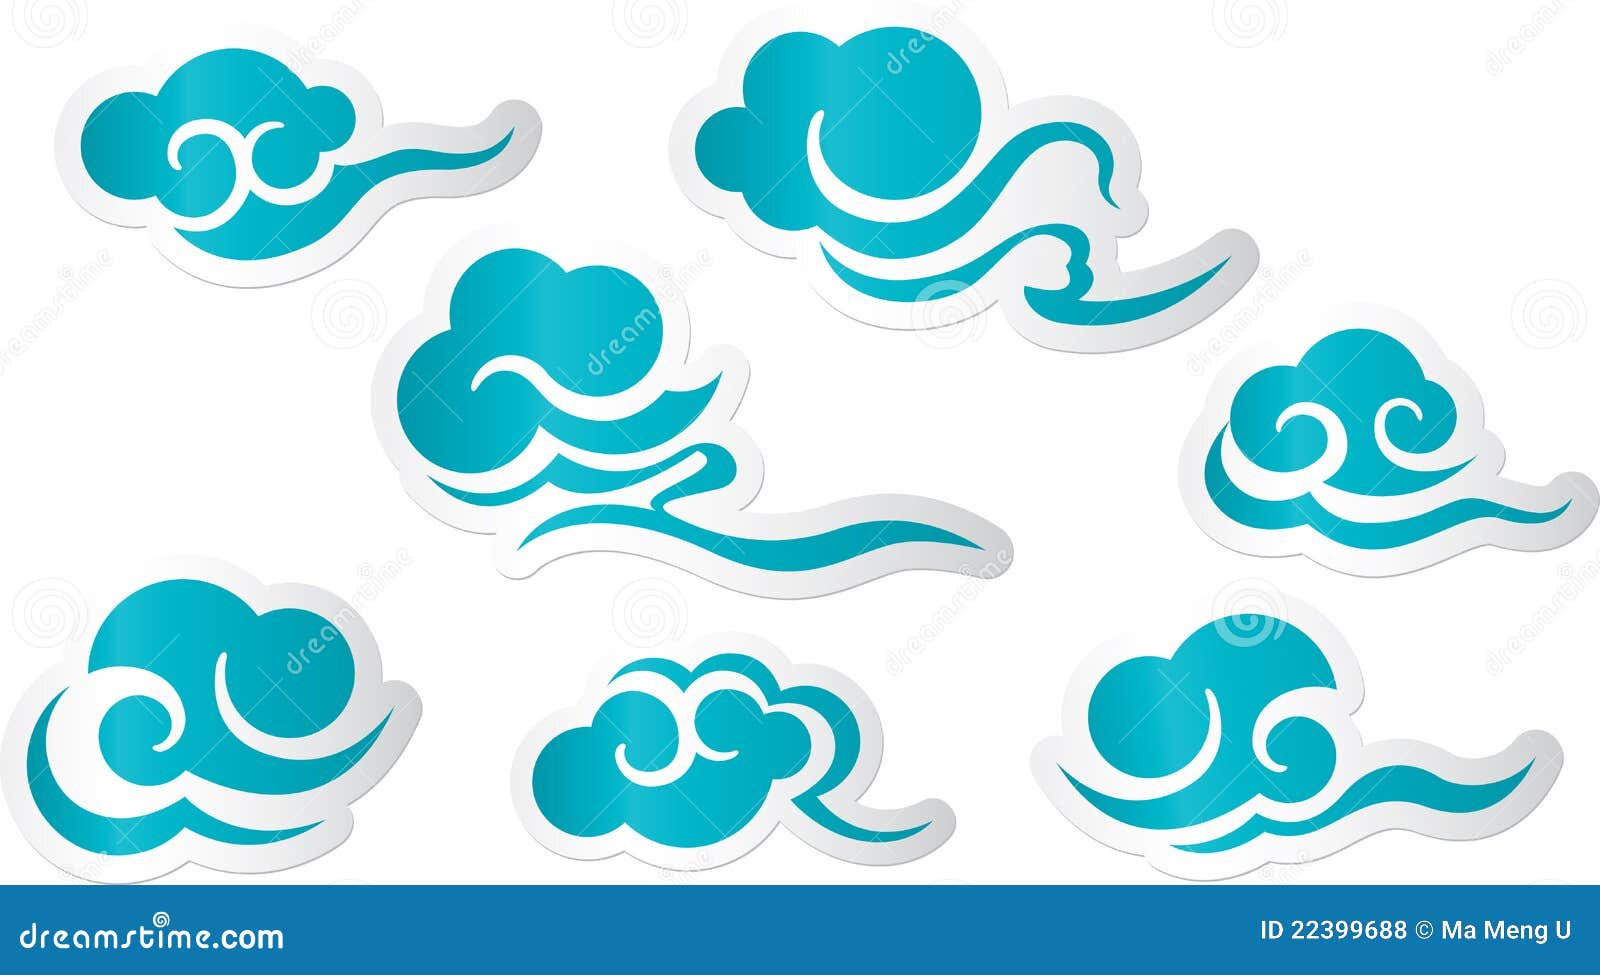 Chinese And Japanese Clouds Design Set Royalty Free Stock Photos